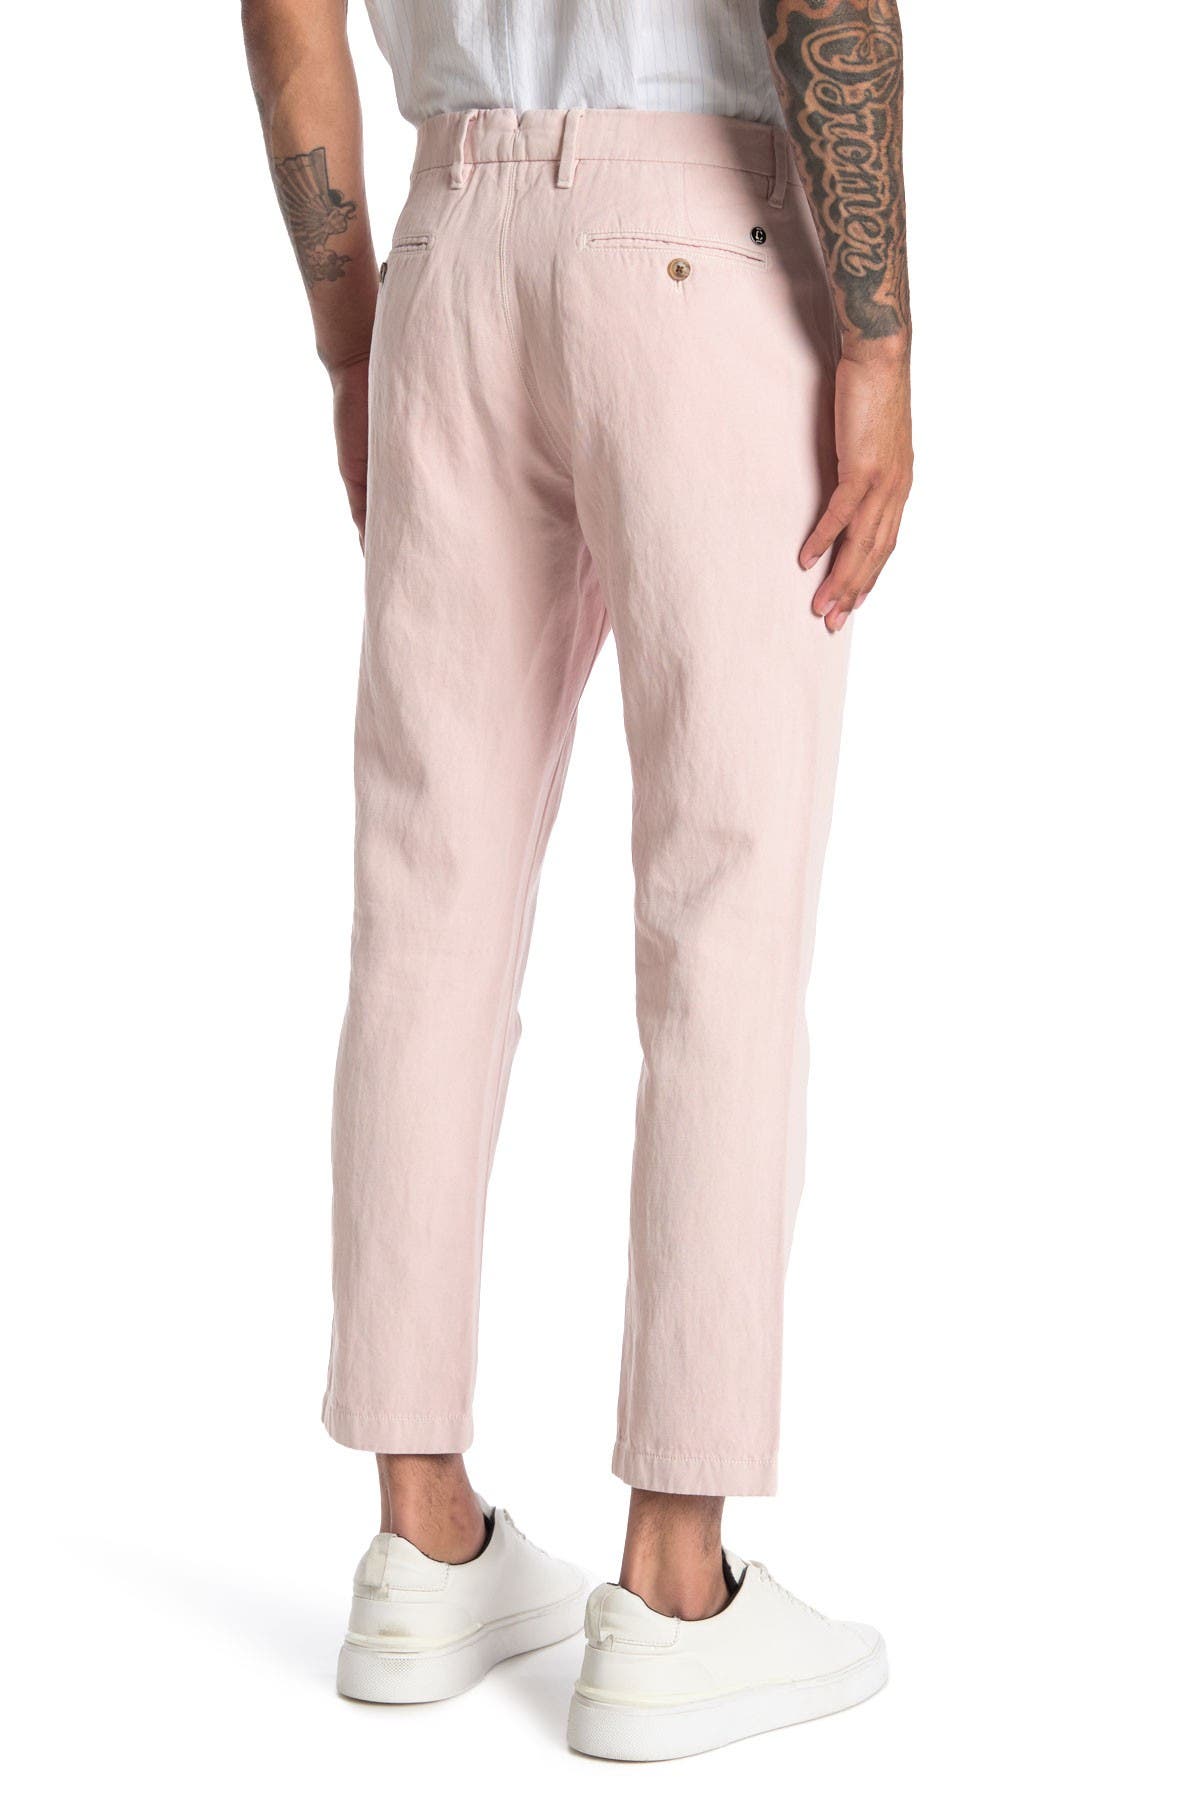 Closed Tapered Leg Pants In Light/pastel Pink